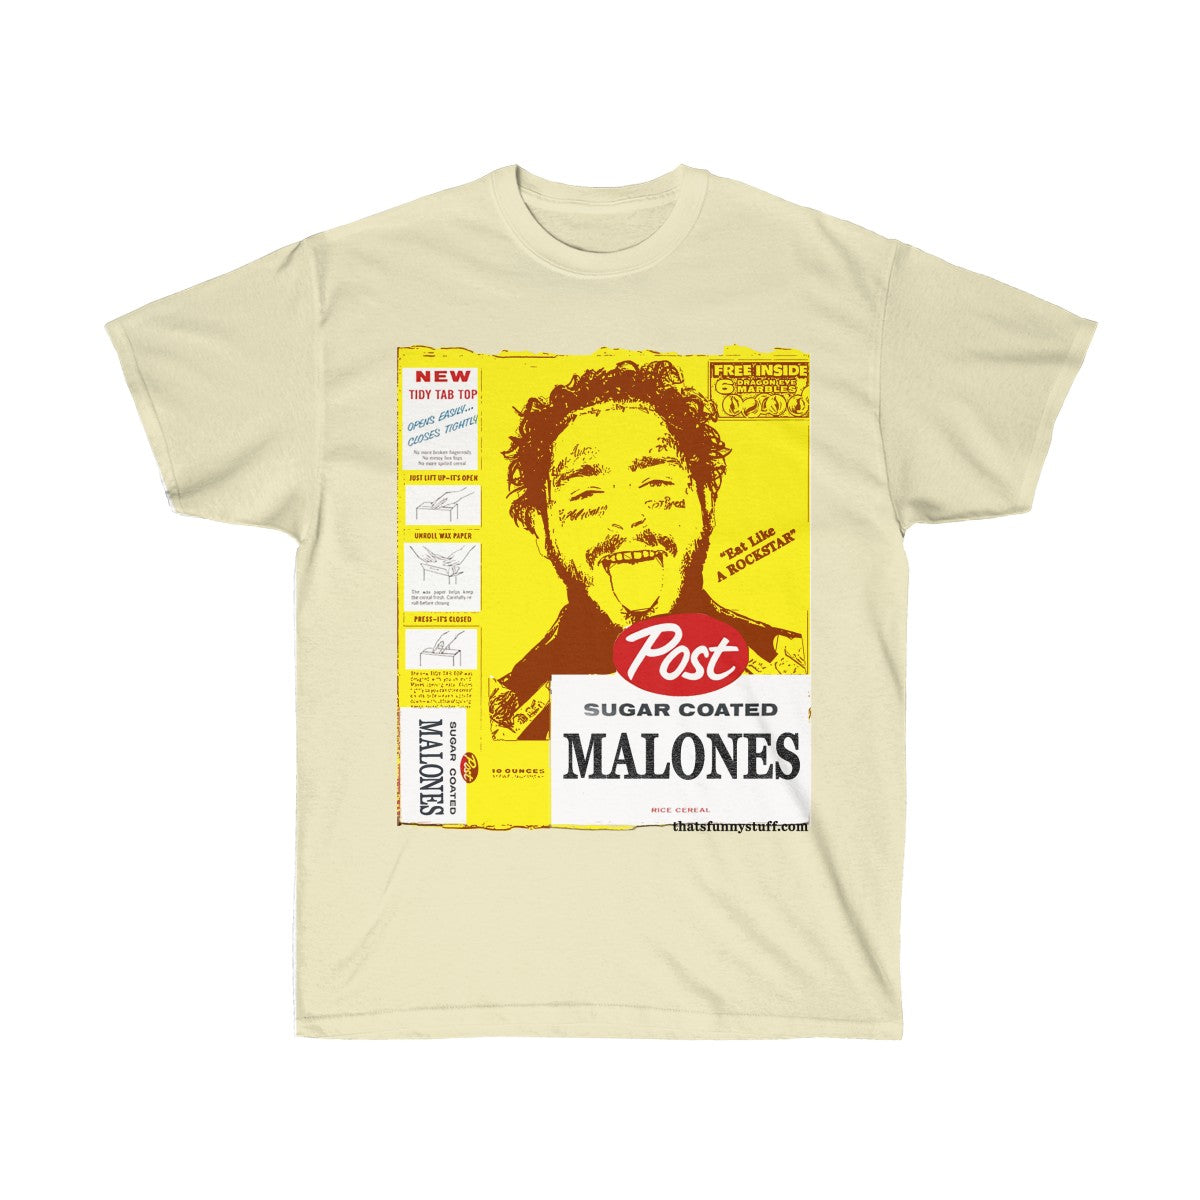 Post Malone's Post Malones Cereal "Eat like a ROCKSTAR" Funny Cereal Box Tee